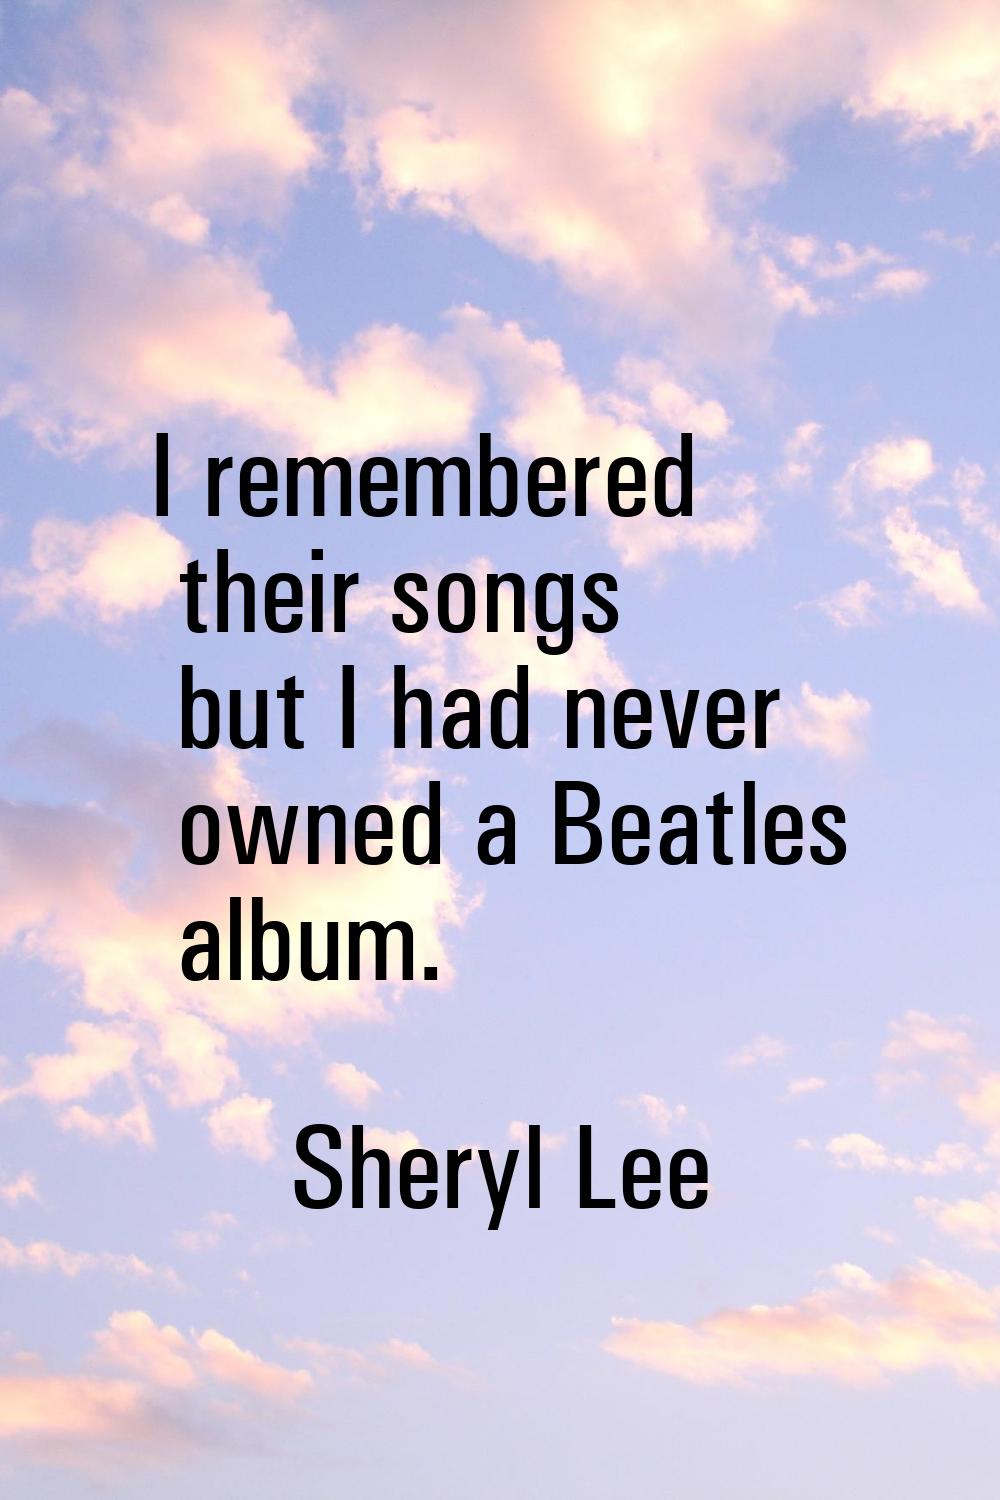 I remembered their songs but I had never owned a Beatles album.